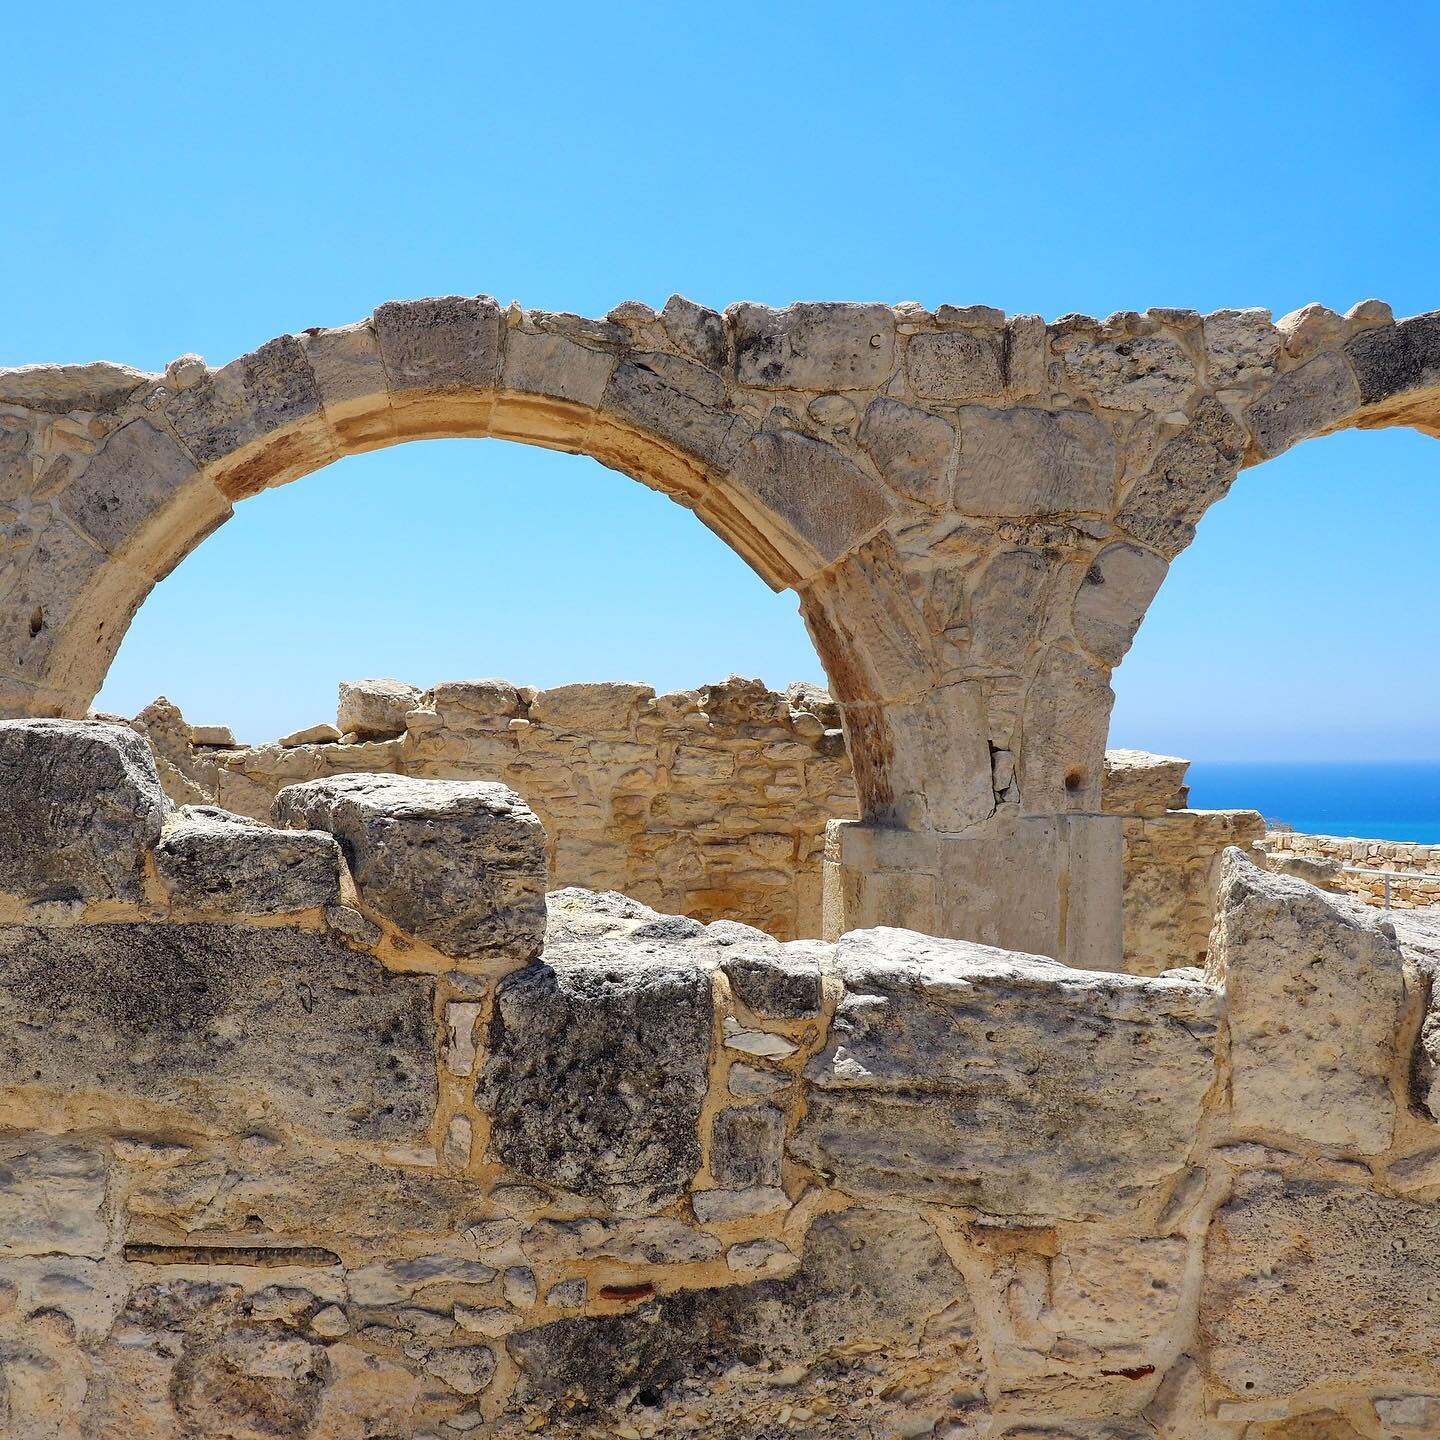 I reckon you could spend a year in Cyprus just exploring its ancient ruins; the sheer volume of them is just nuts.
〰
This is part of the sprawling ruins of Kourion, an ancient Greek city-state with some pretty speccy sea views.
〰
#cyprus #ancientruin